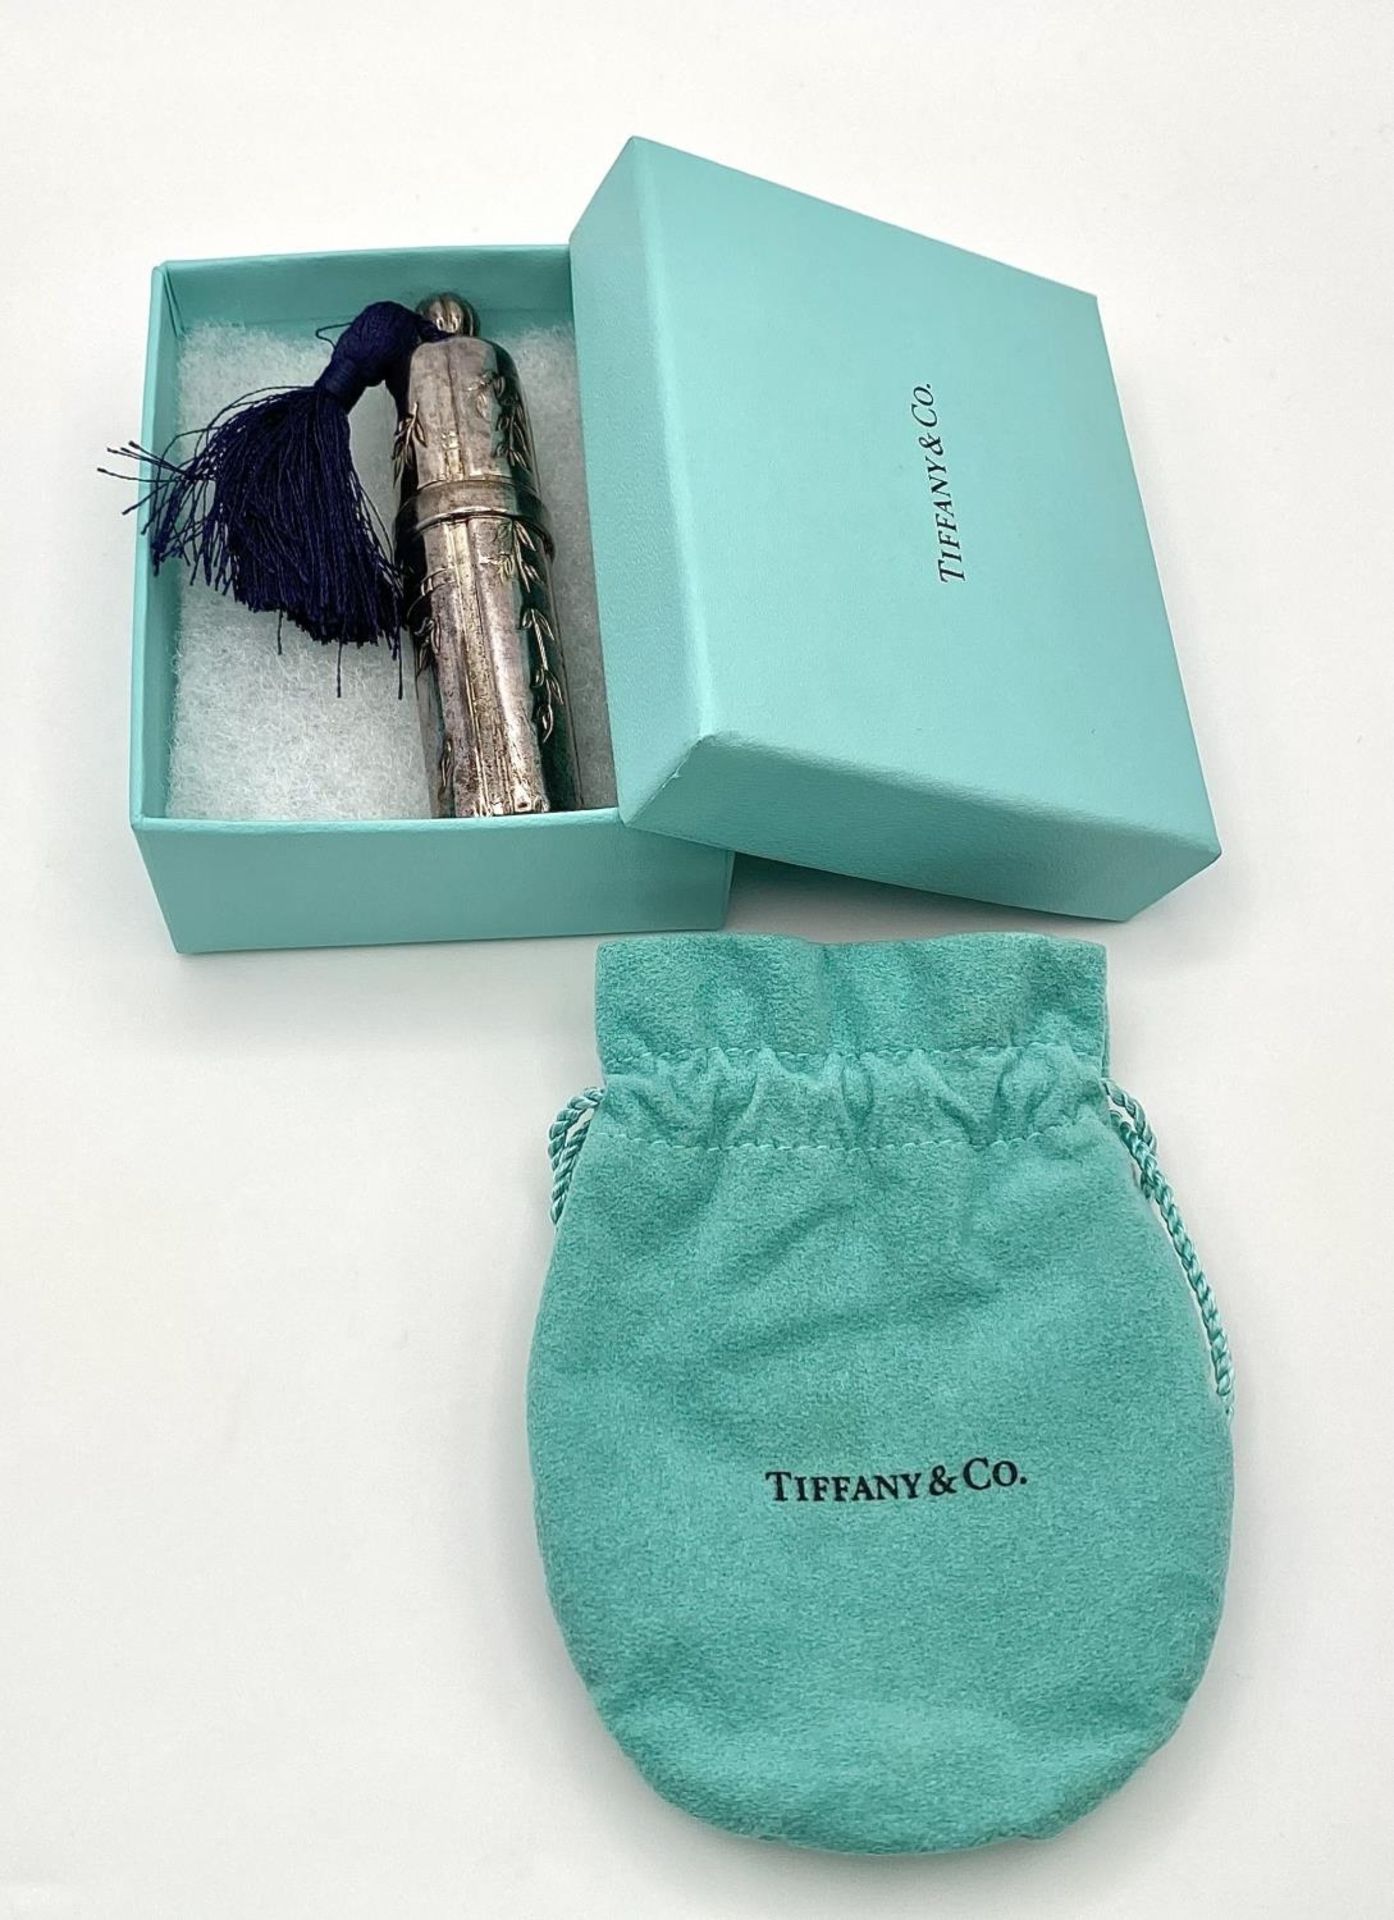 A TIFFANY & CO sterling silver perfume bottle with original pouch and presentation box. - Image 3 of 4